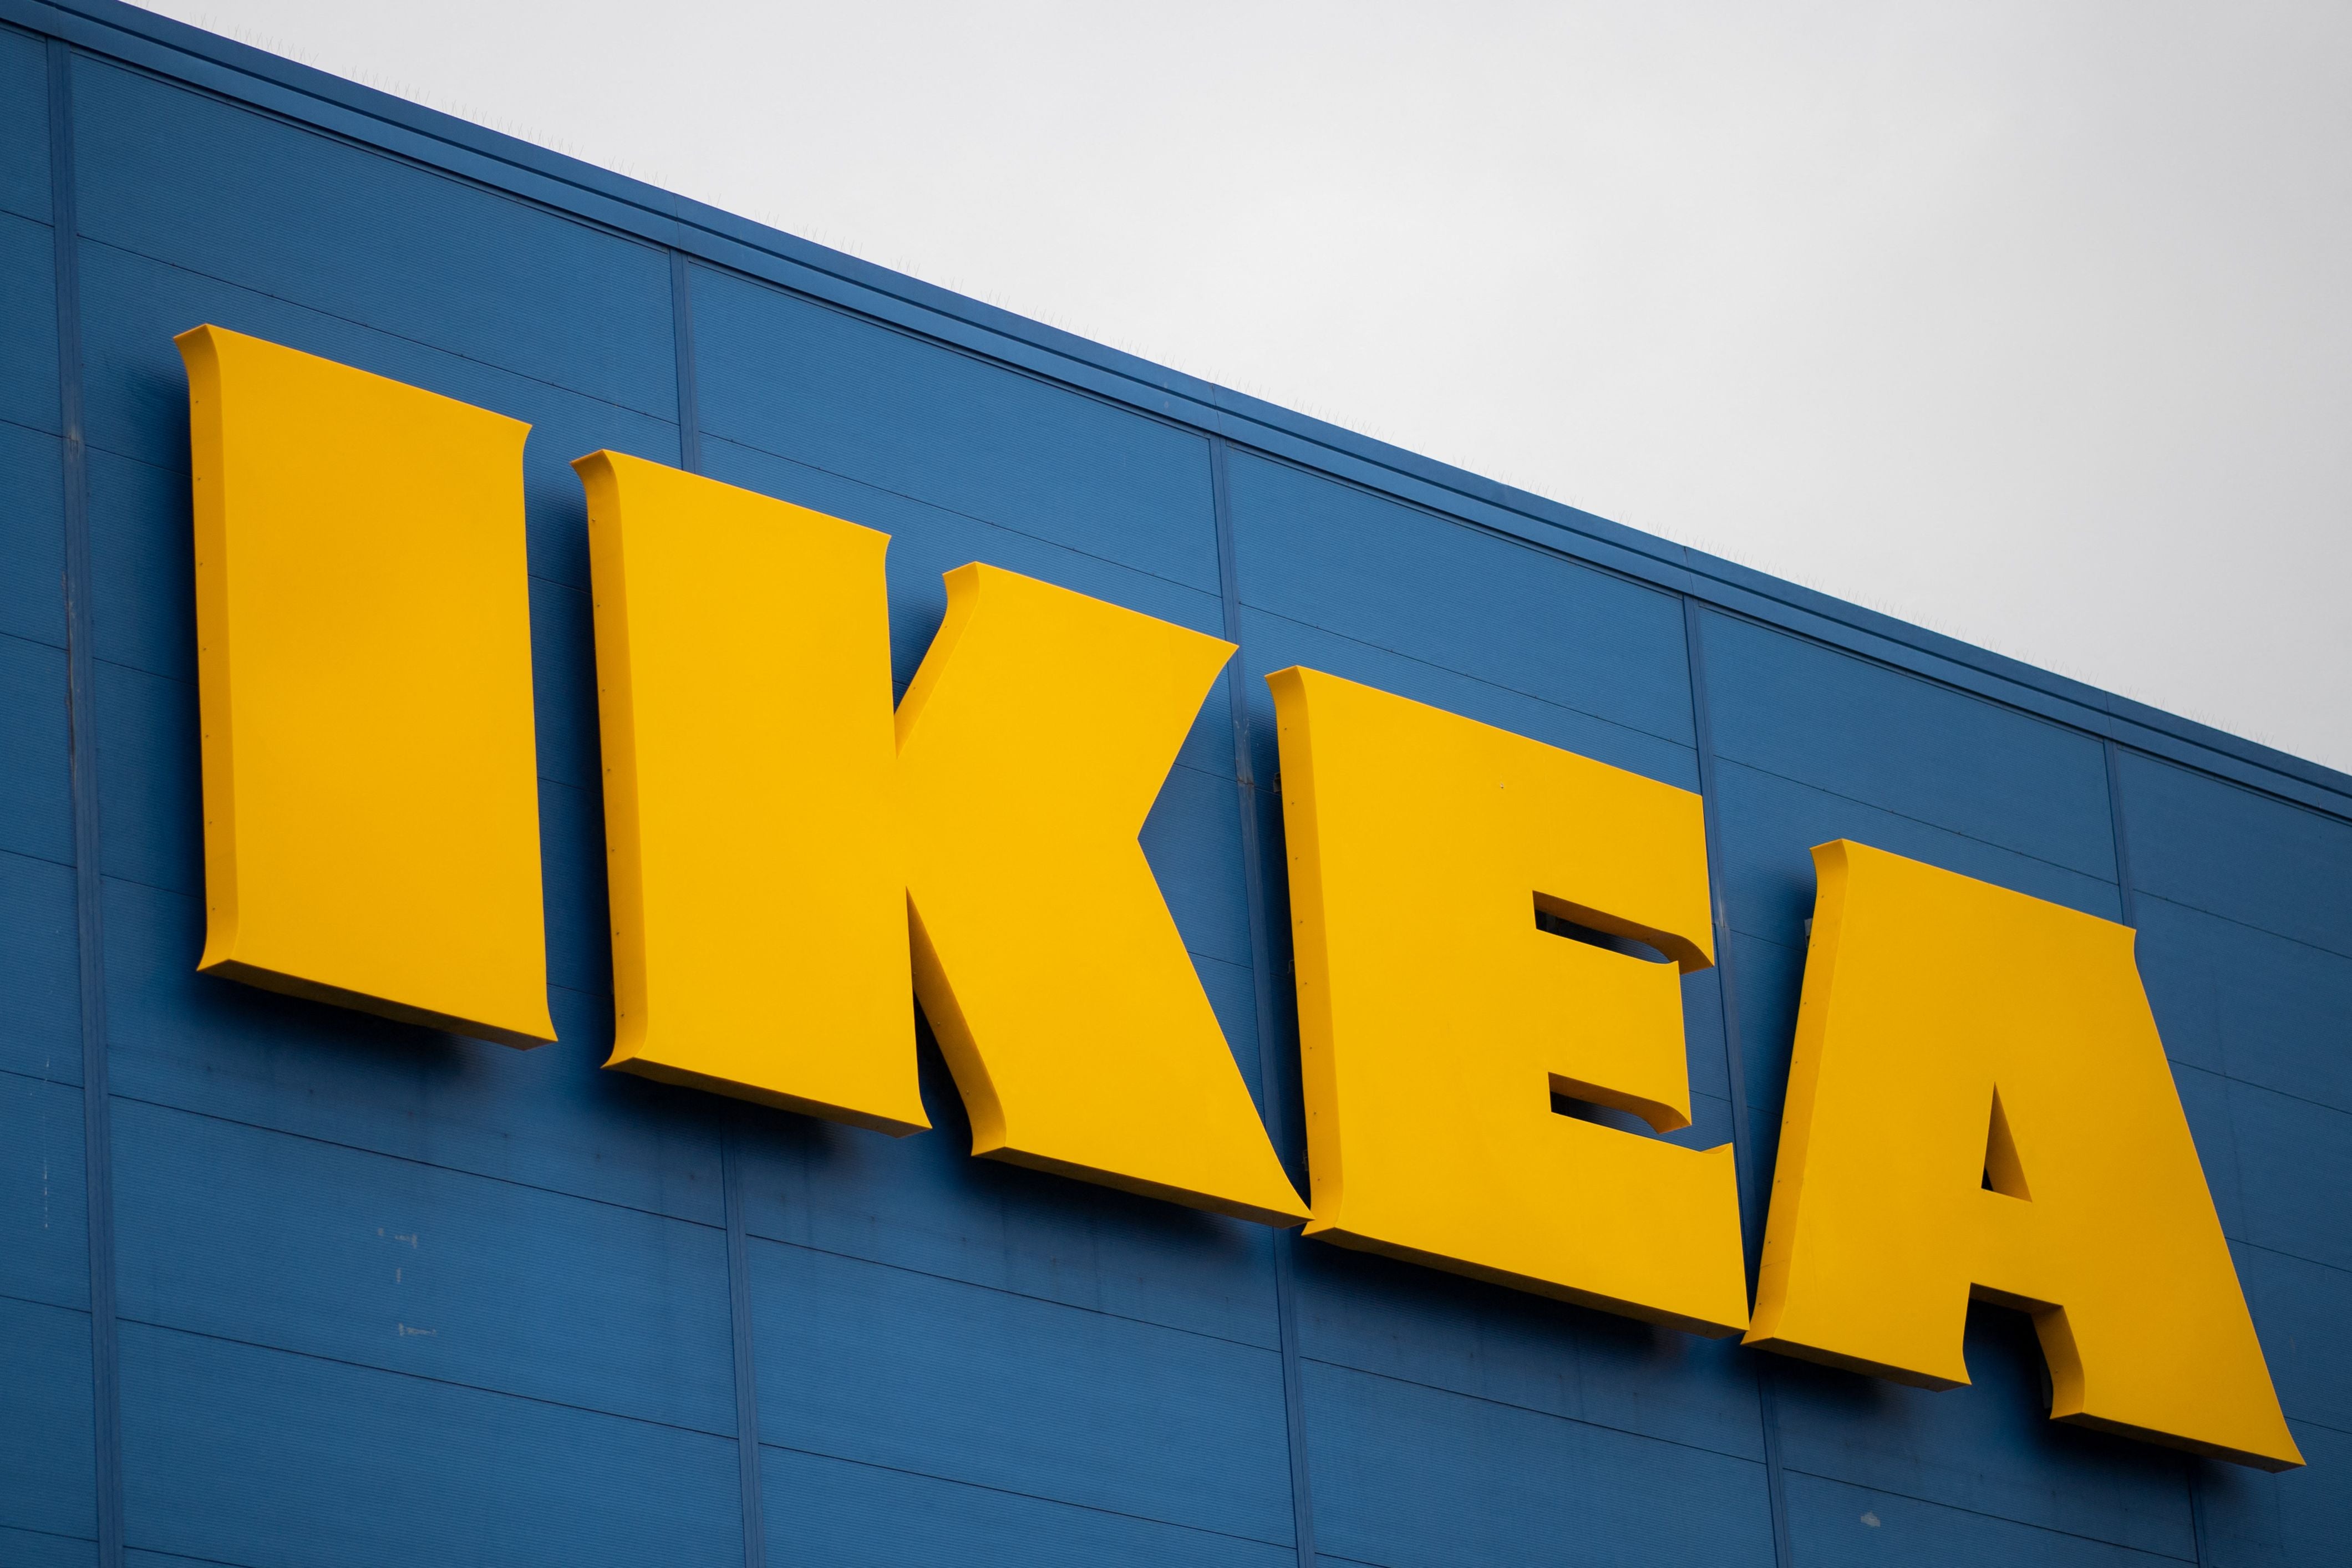 IKEA has recorded a six per cent rise in full-year sales